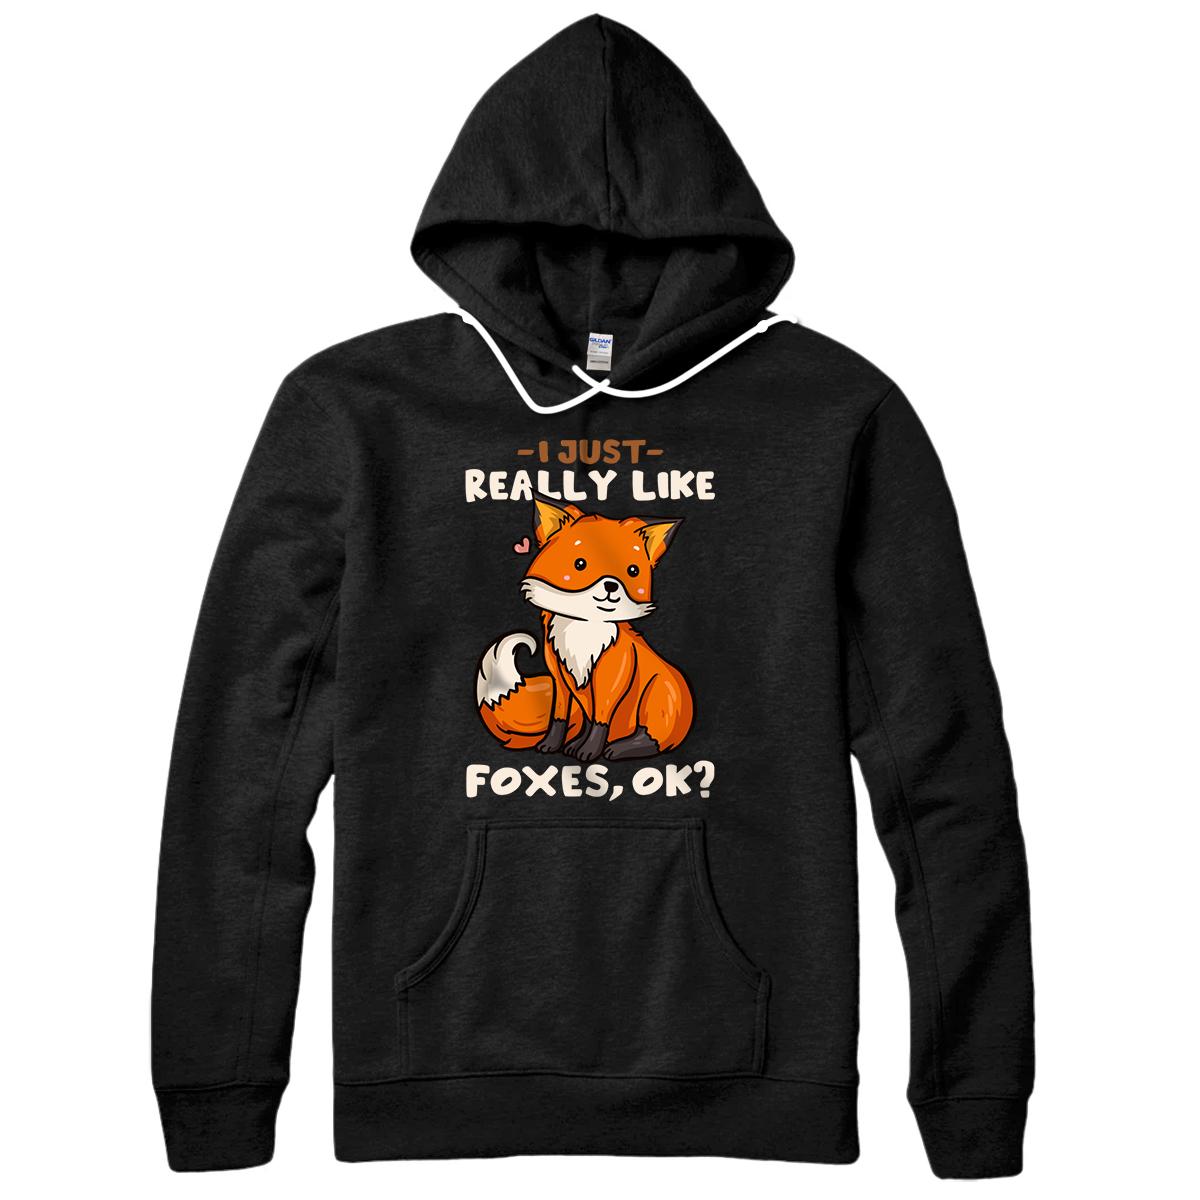 Personalized Foxes Gift for Fox Lovers I Just Really Like Foxes, Ok? Pullover Hoodie